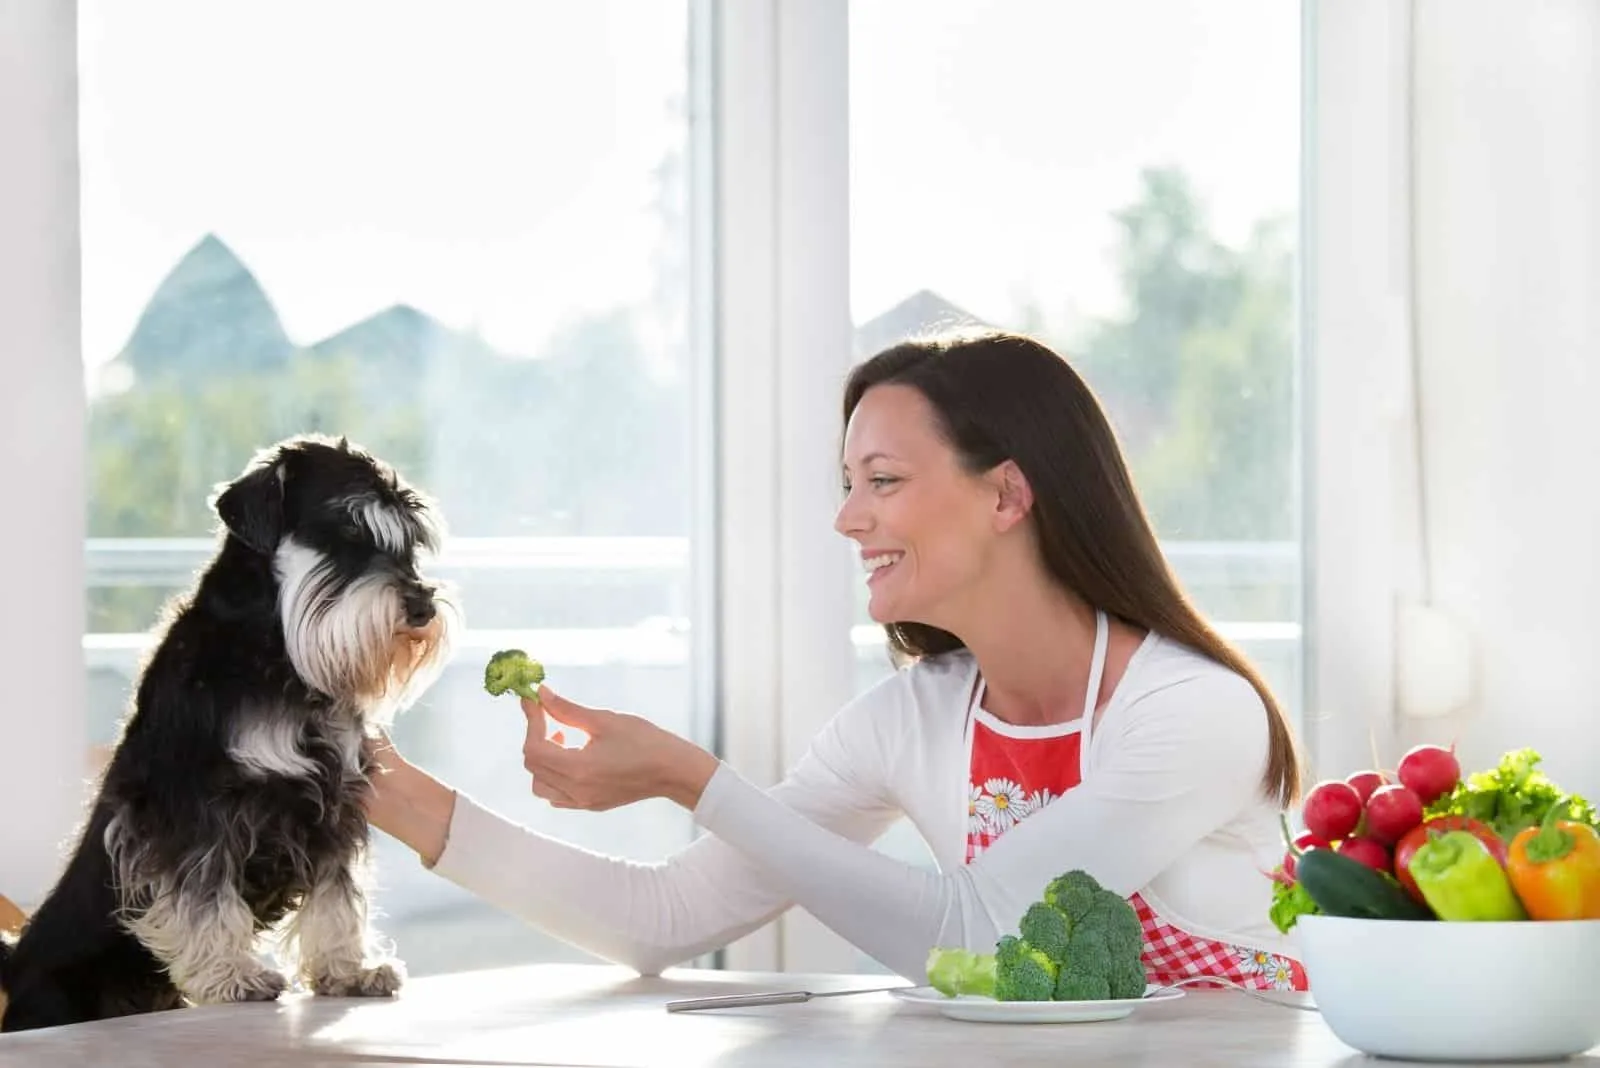 smiling young woman giving broccoli to her dog by the table 